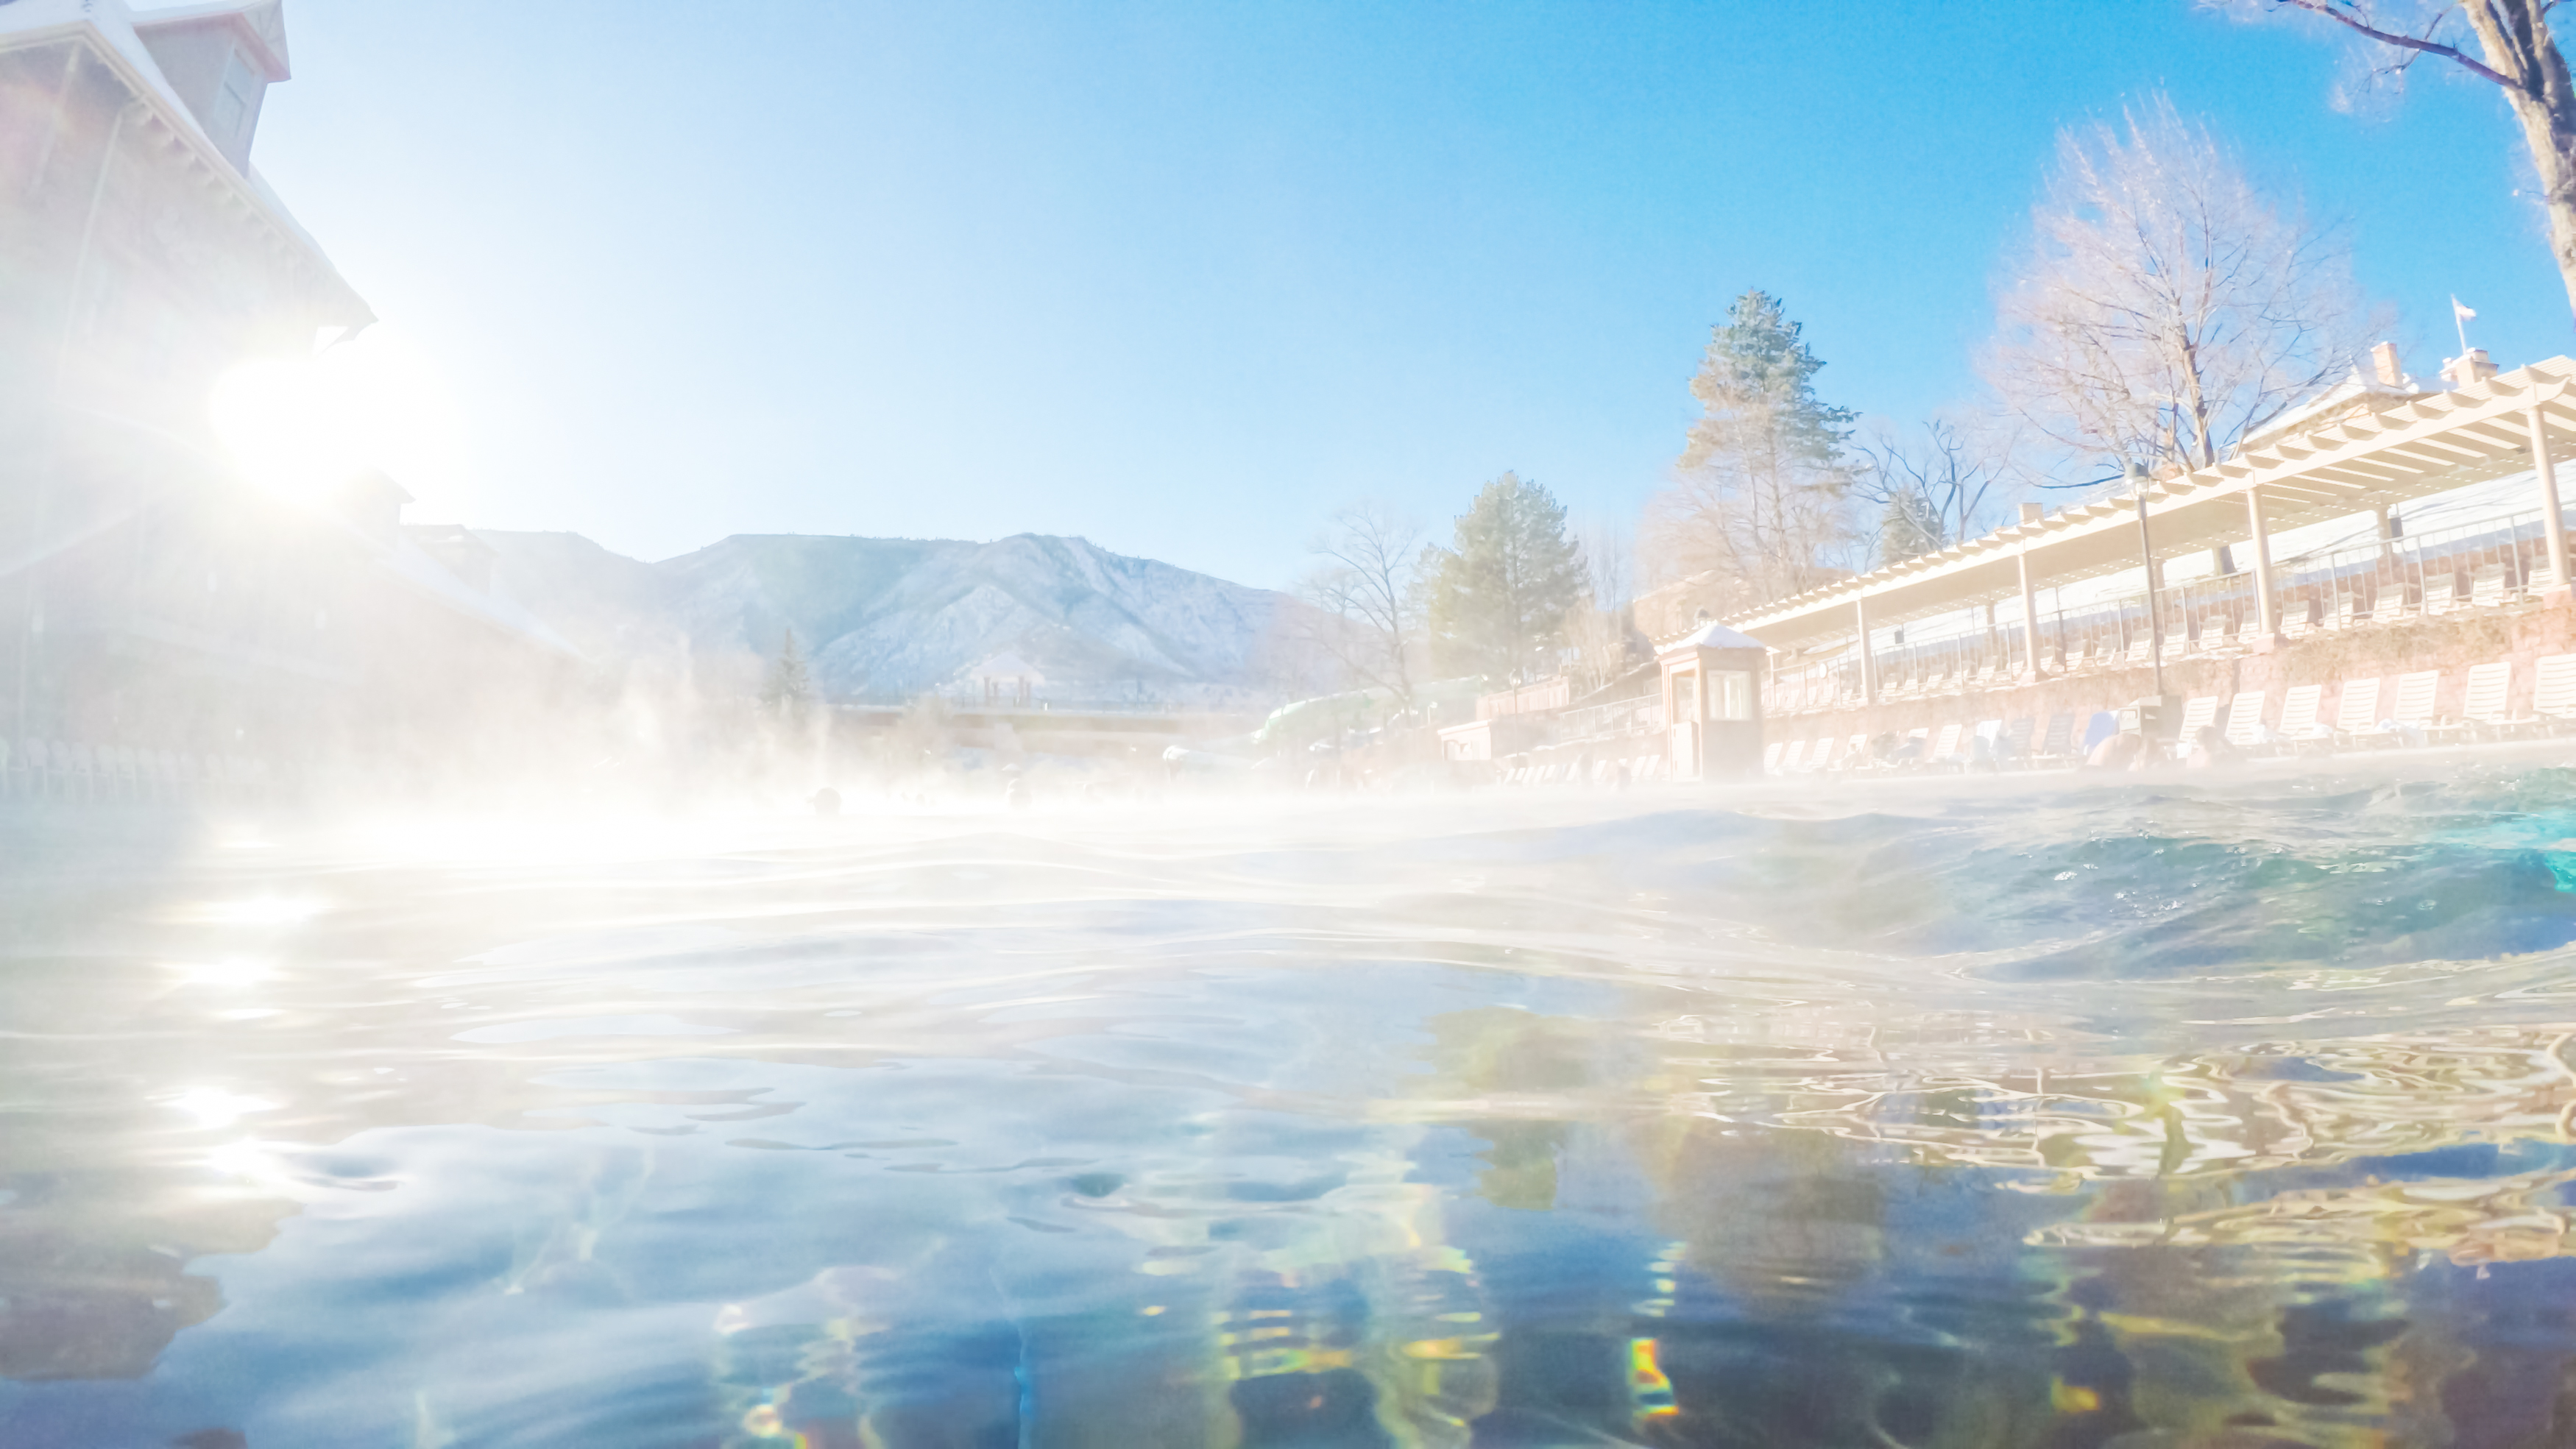 Hot springs within driving distance of Breckenridge & Summit County, CO